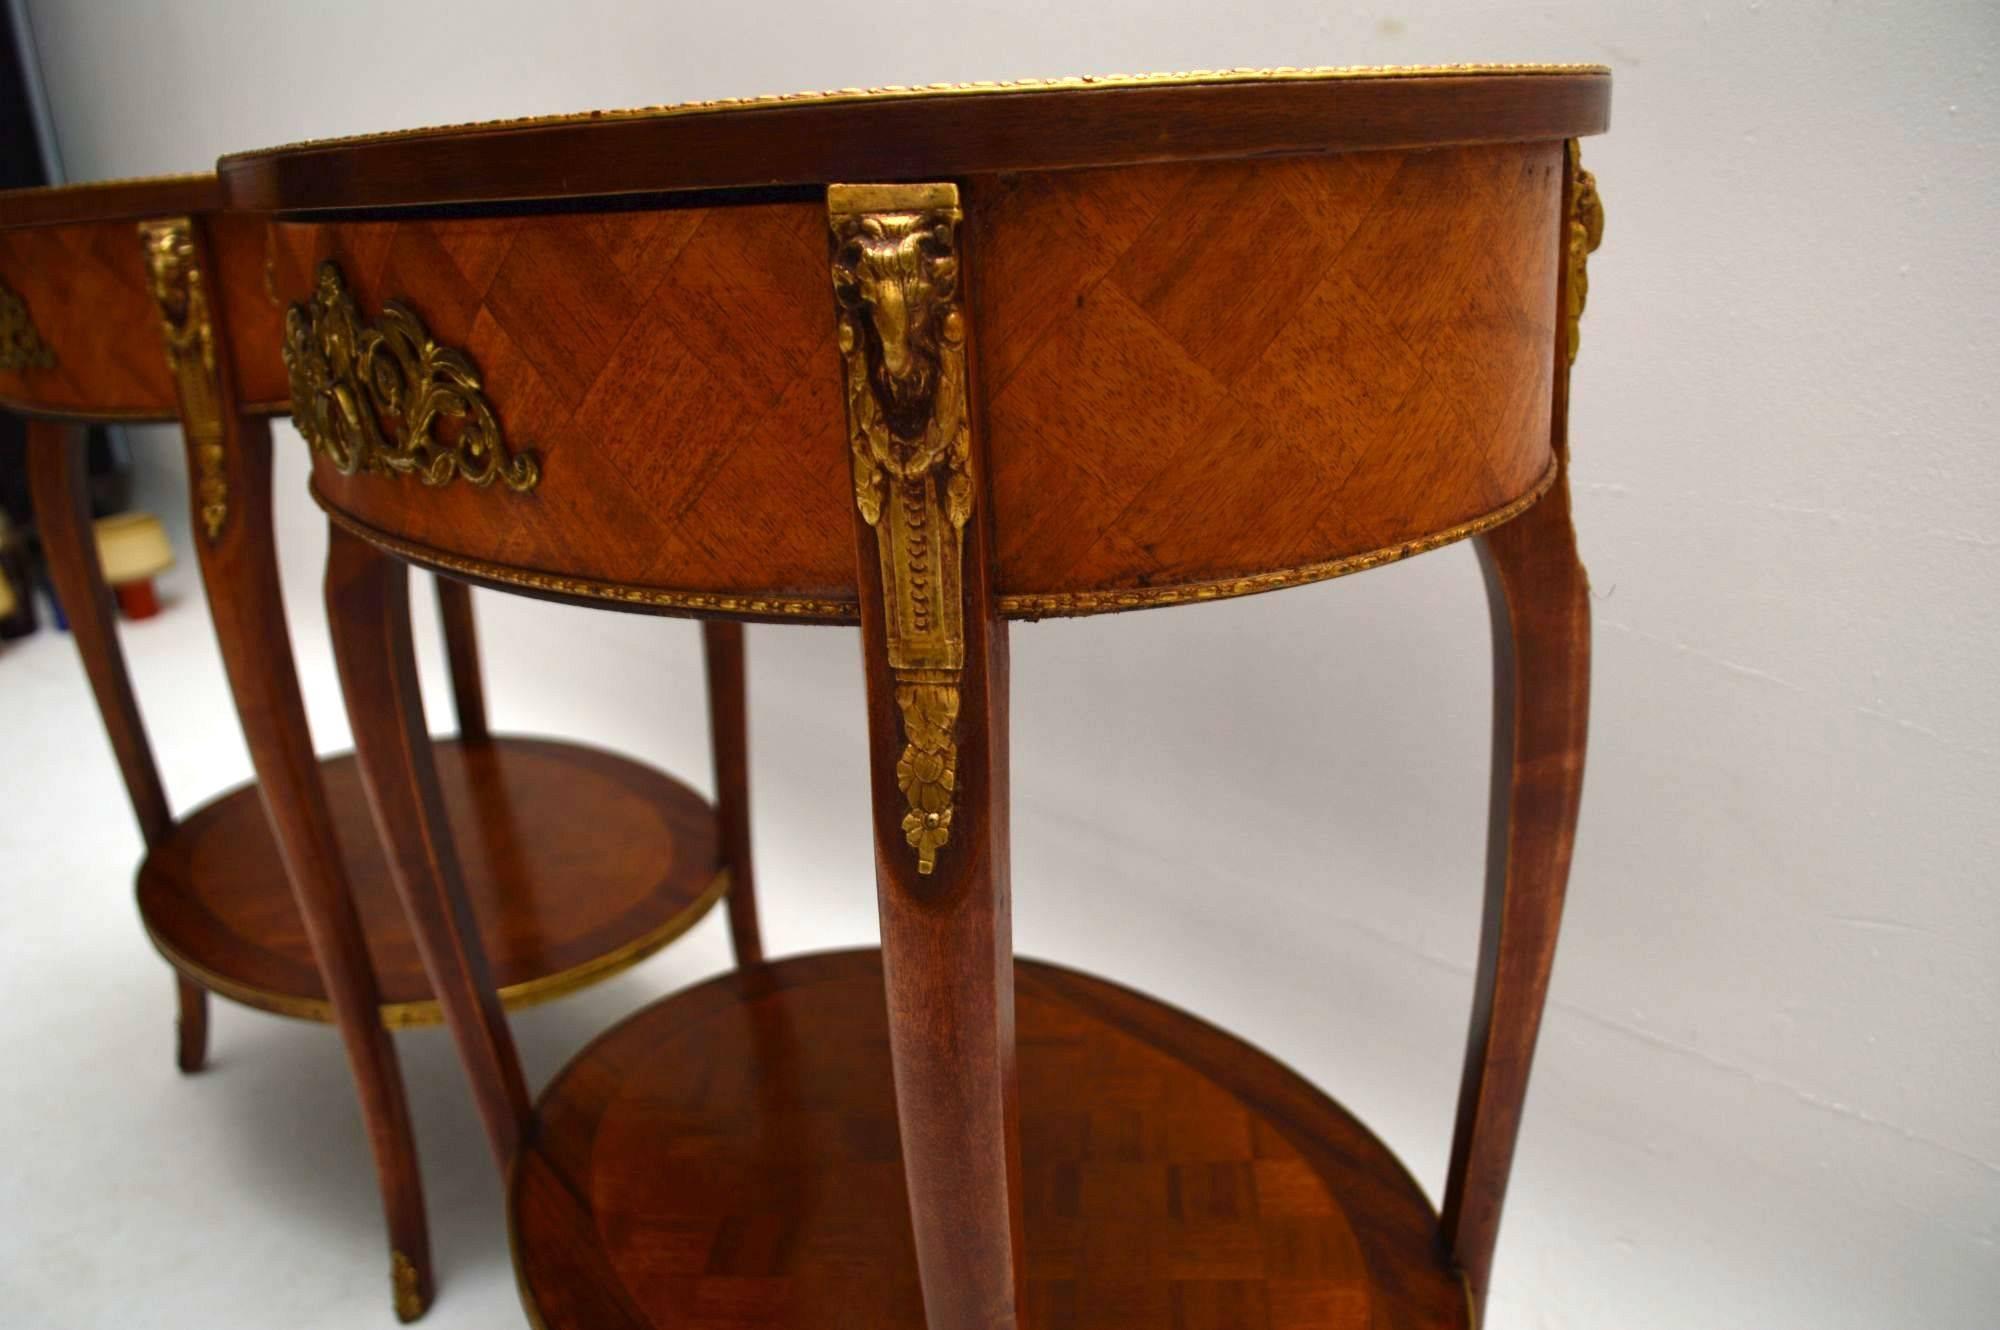 Kingwood Pair of Antique French Parquetry Top Tables